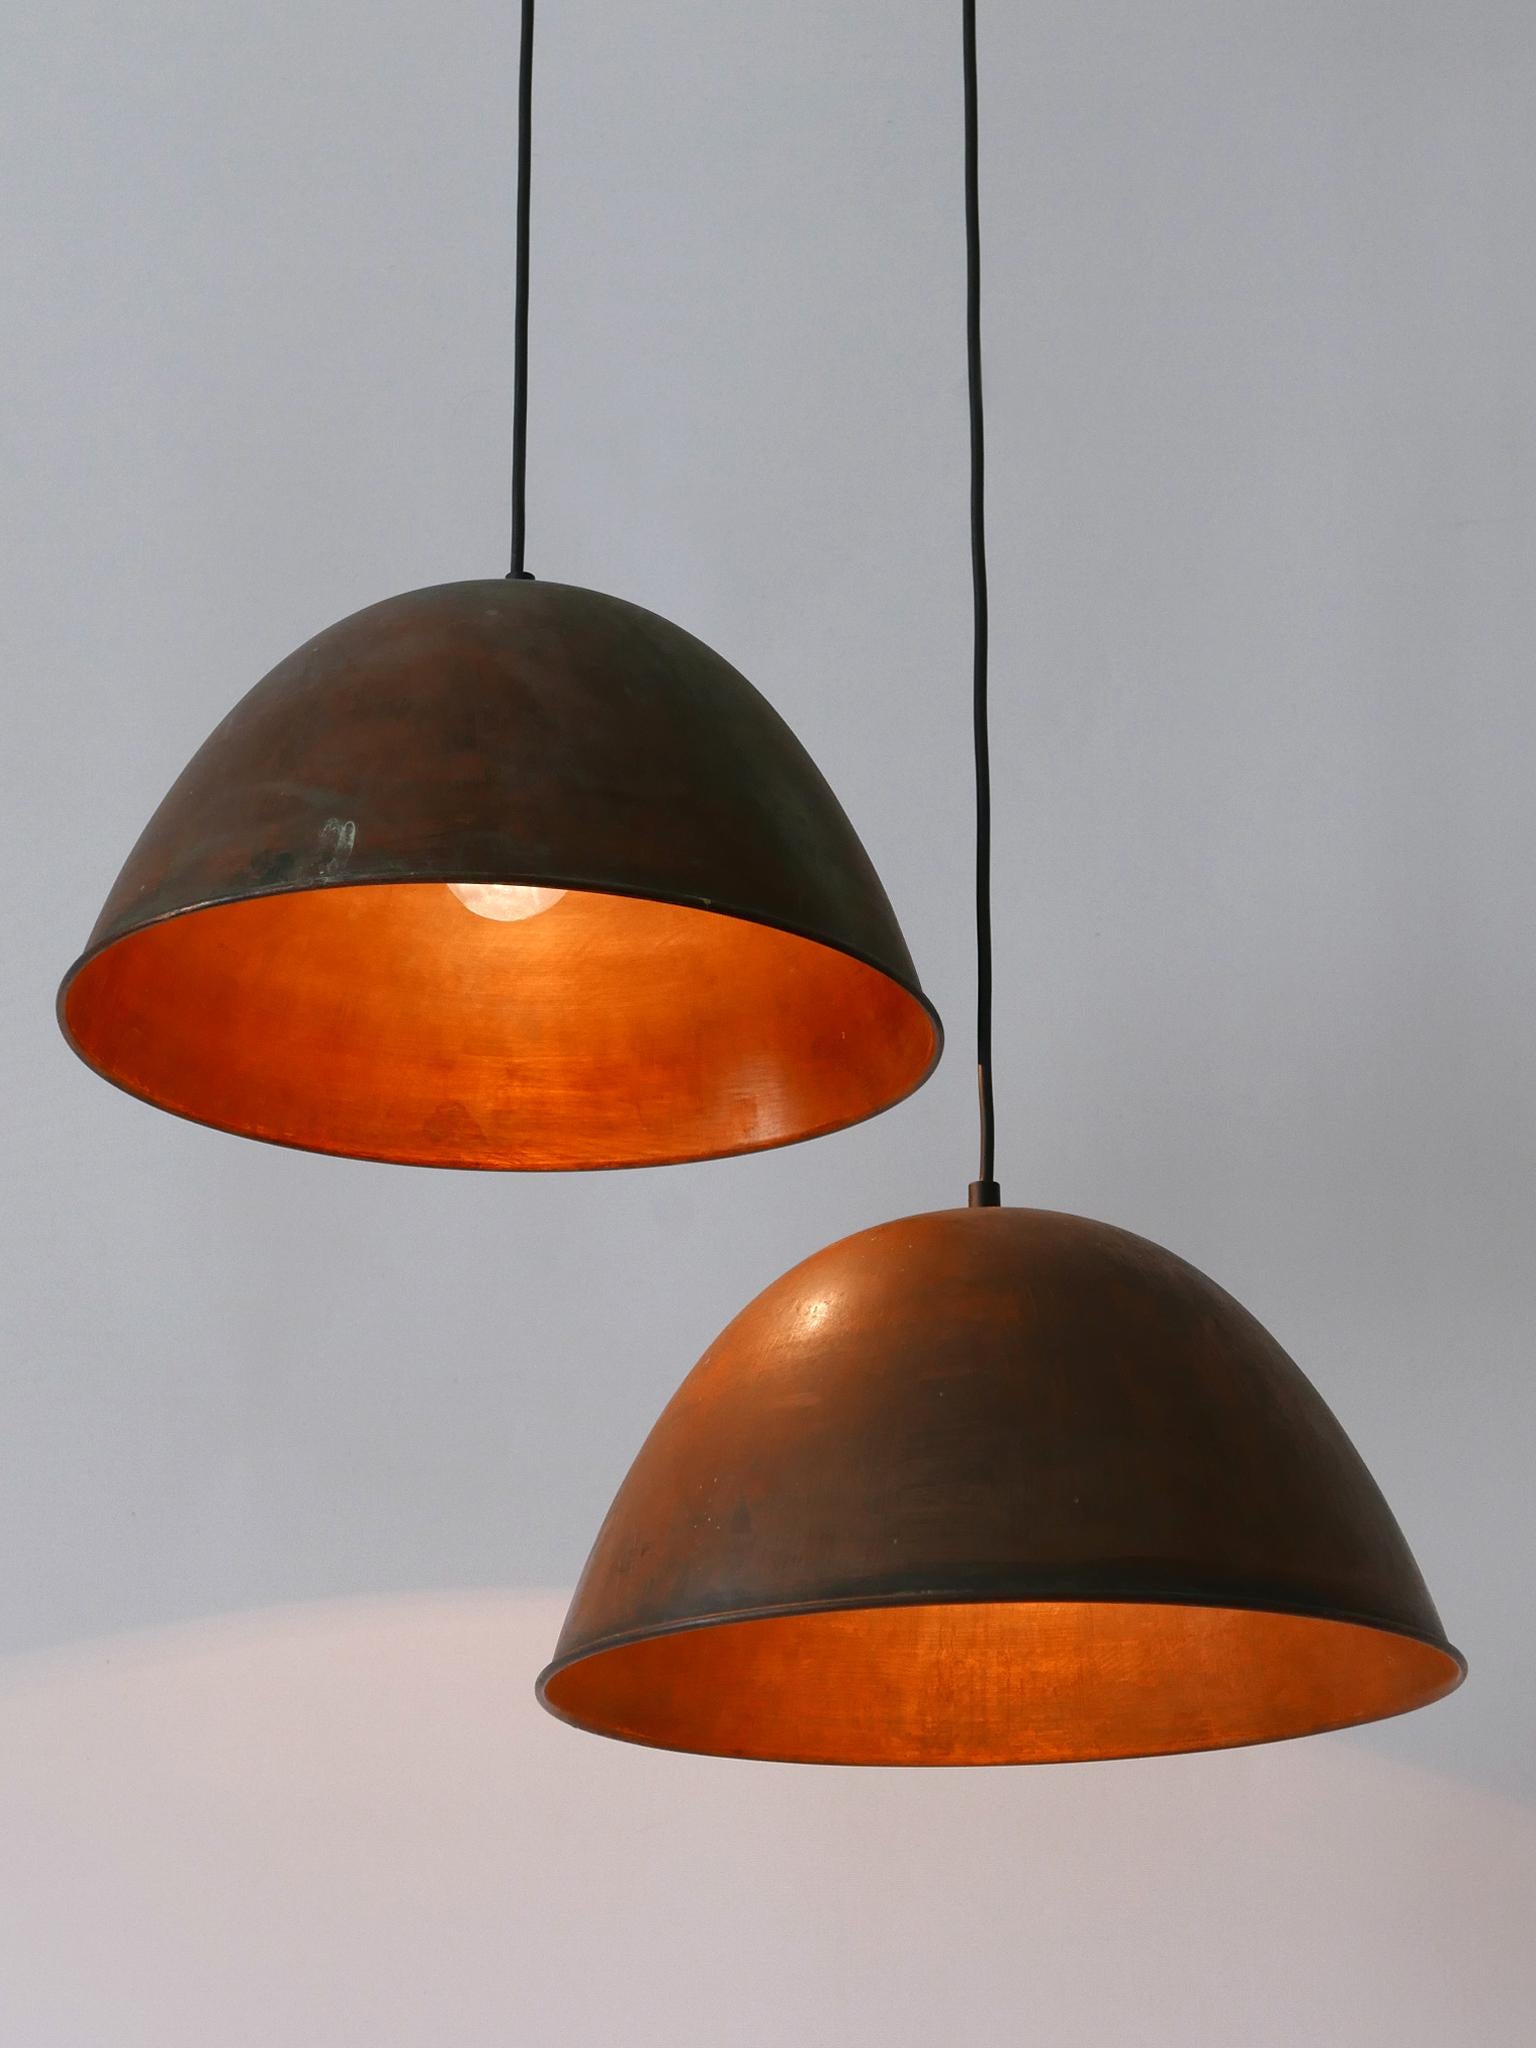 Set of Two Mid-Century Modern Copper Pendant Lamps or Hanging Lights 1950s For Sale 10